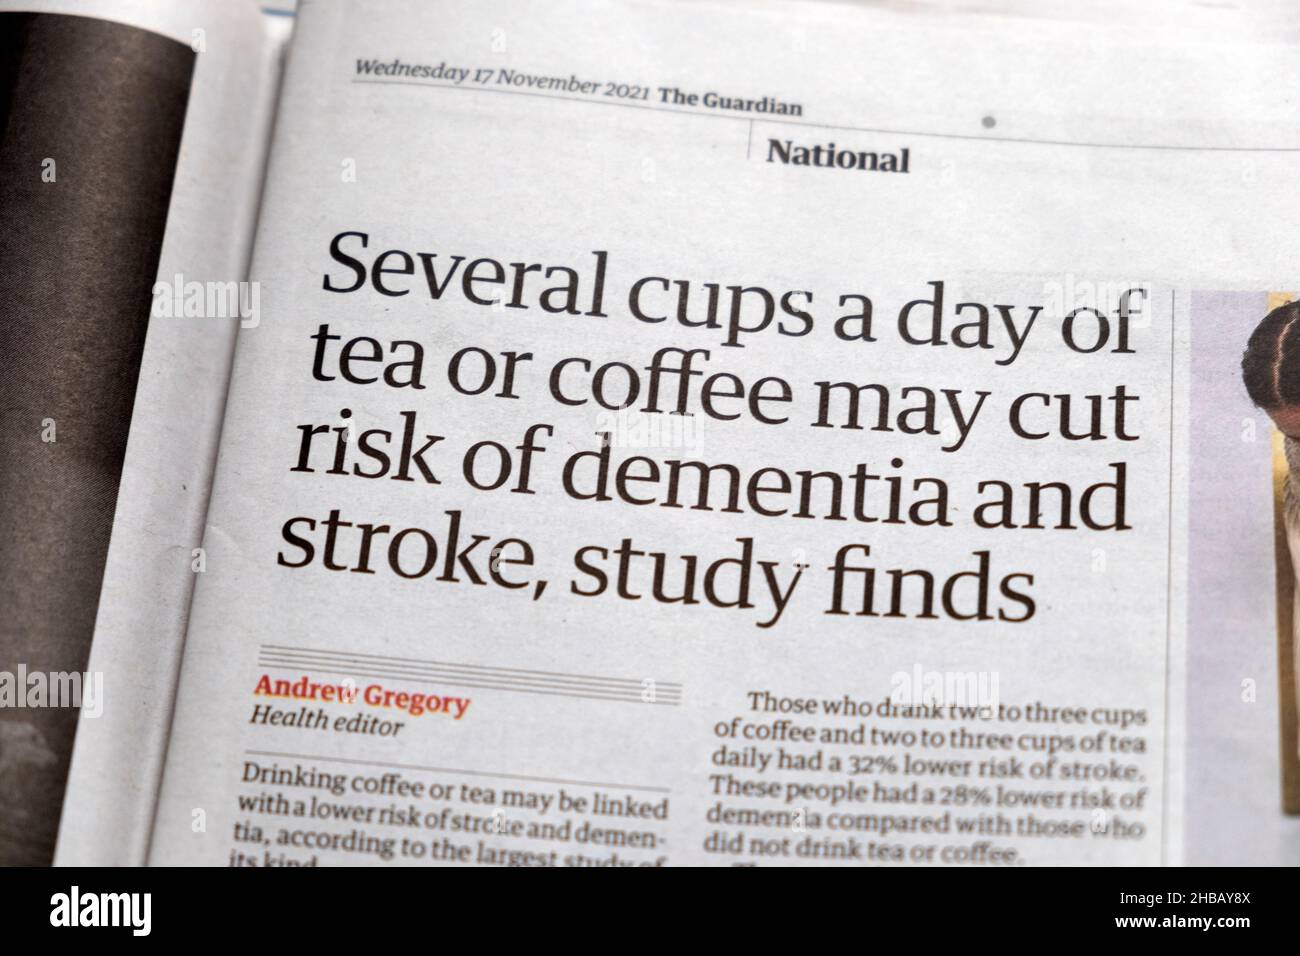 'Several cups a day of tea or coffee may cut risk of dementia and stroke, study finds' Guardian newspaper headline clipping on17 November 2021 UK Stock Photo